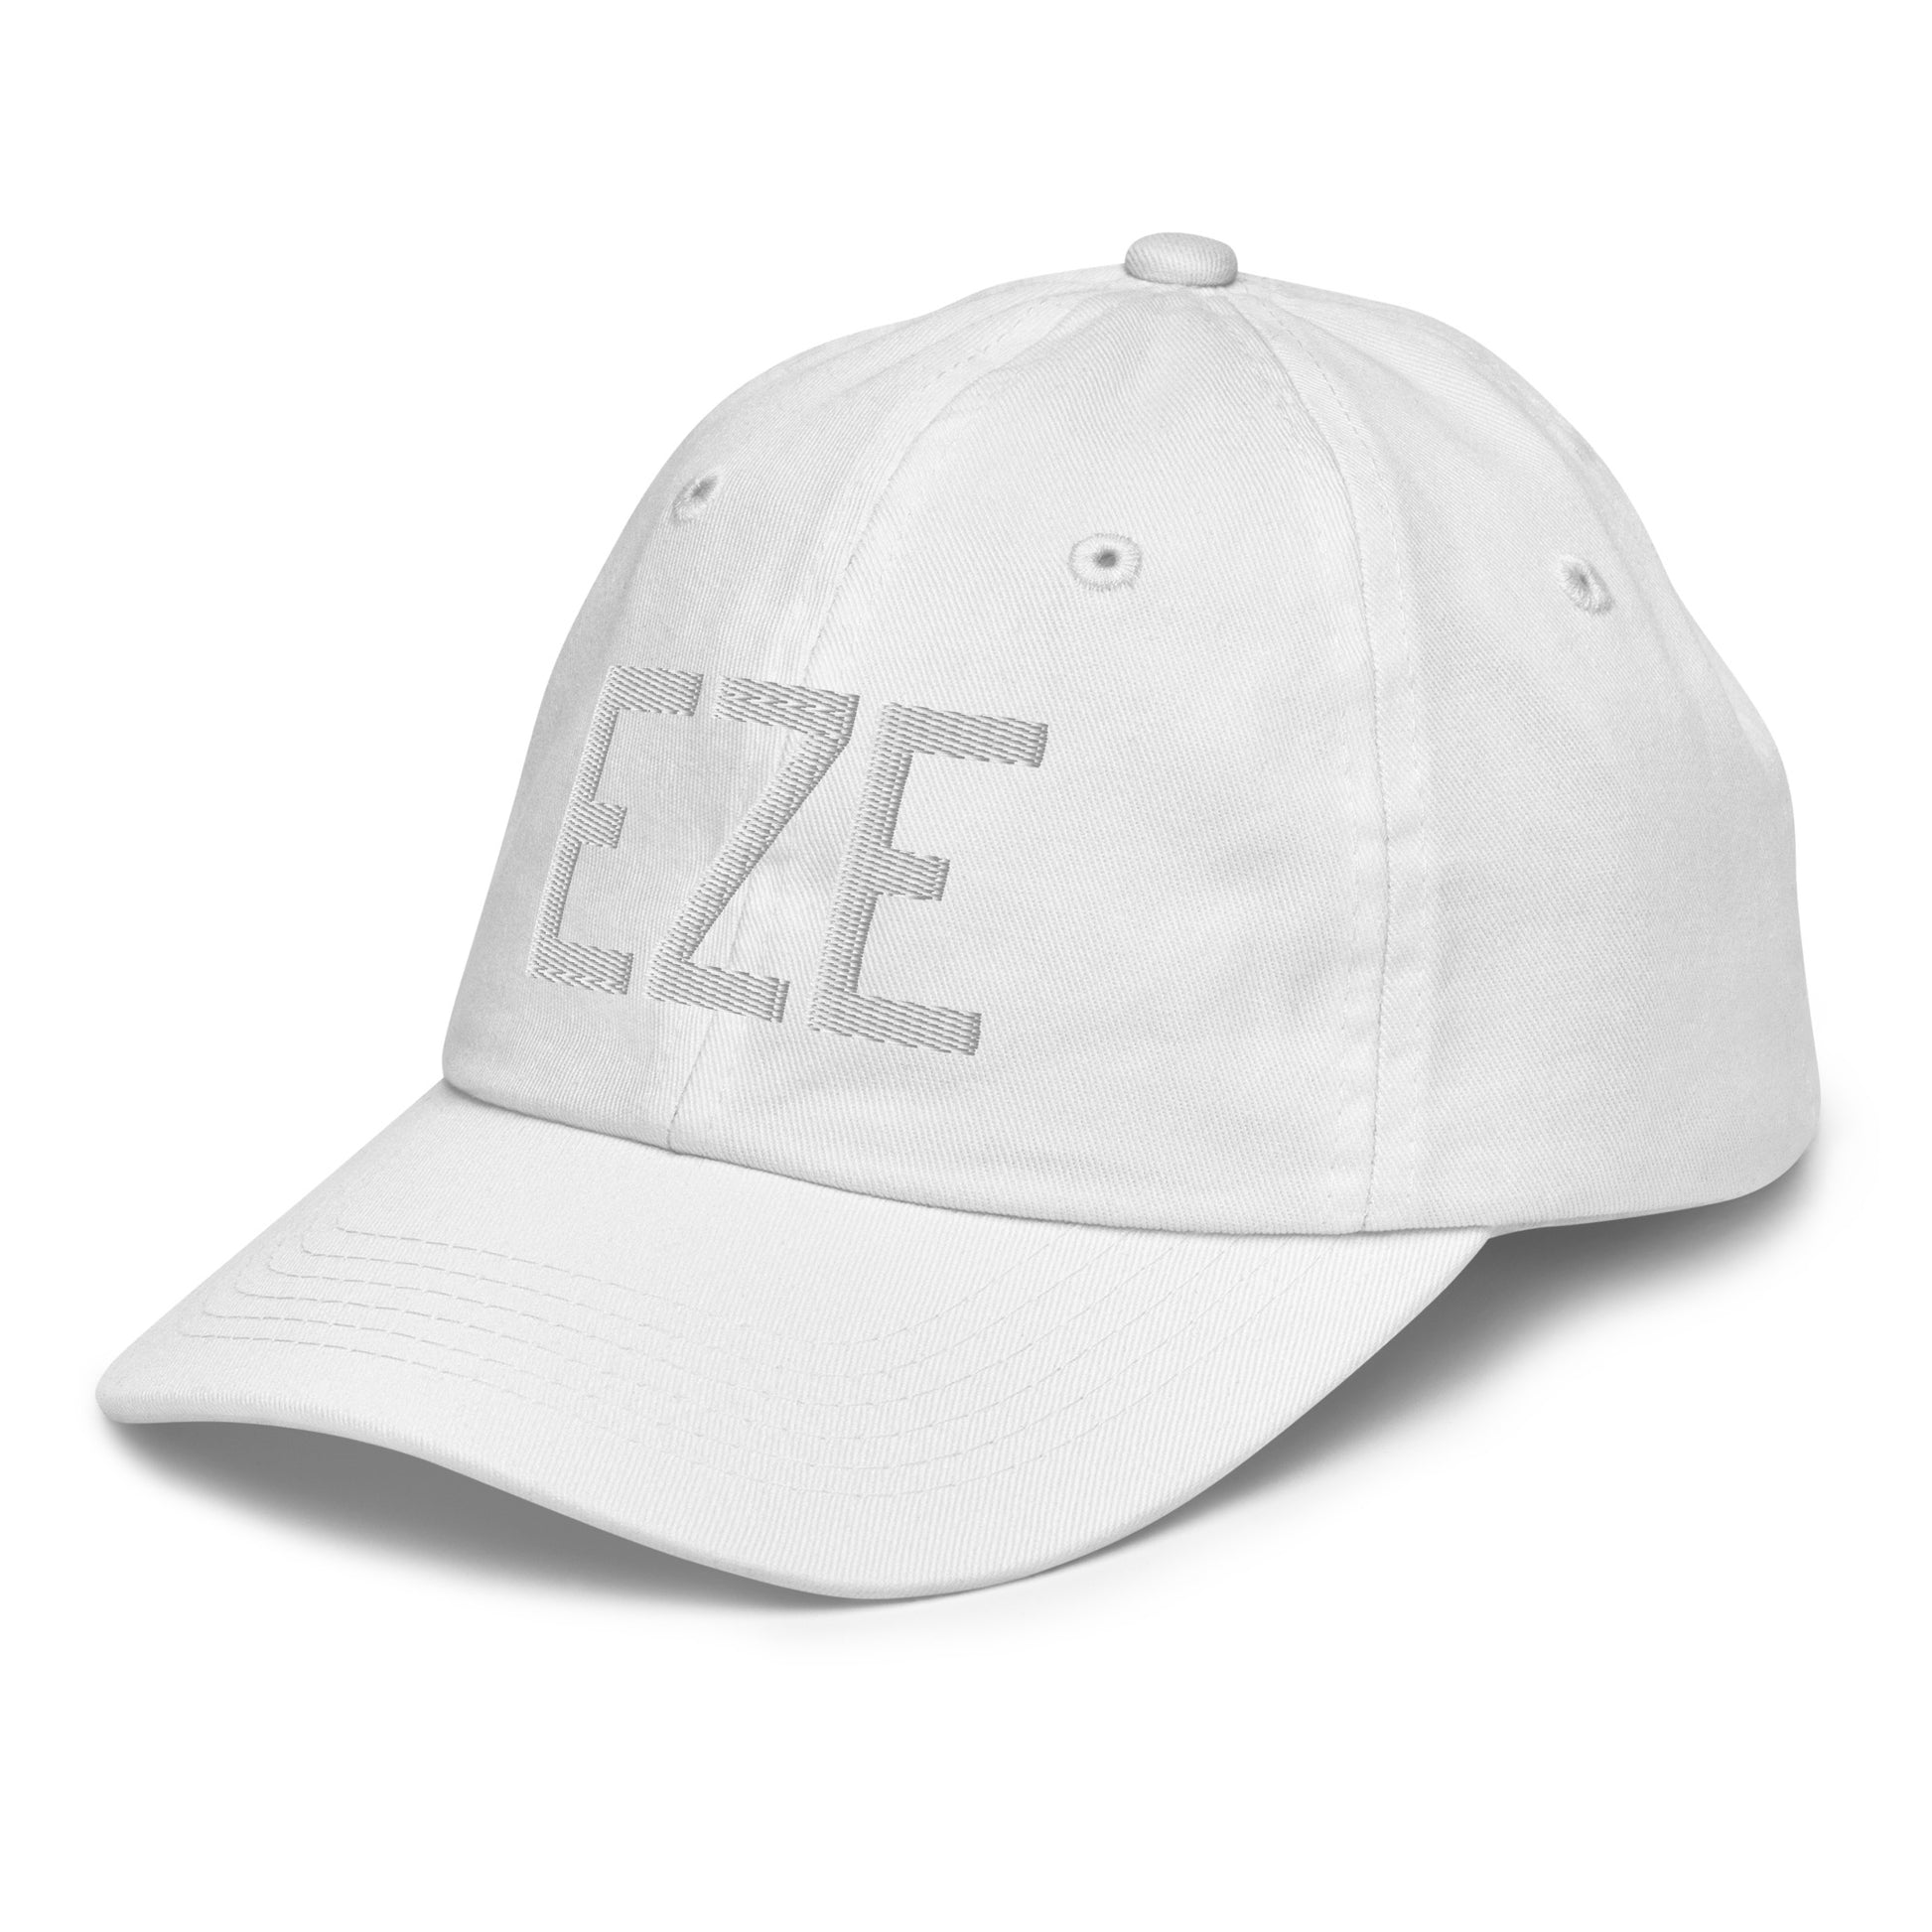 Airport Code Kid's Baseball Cap - White • EZE Buenos Aires • YHM Designs - Image 36